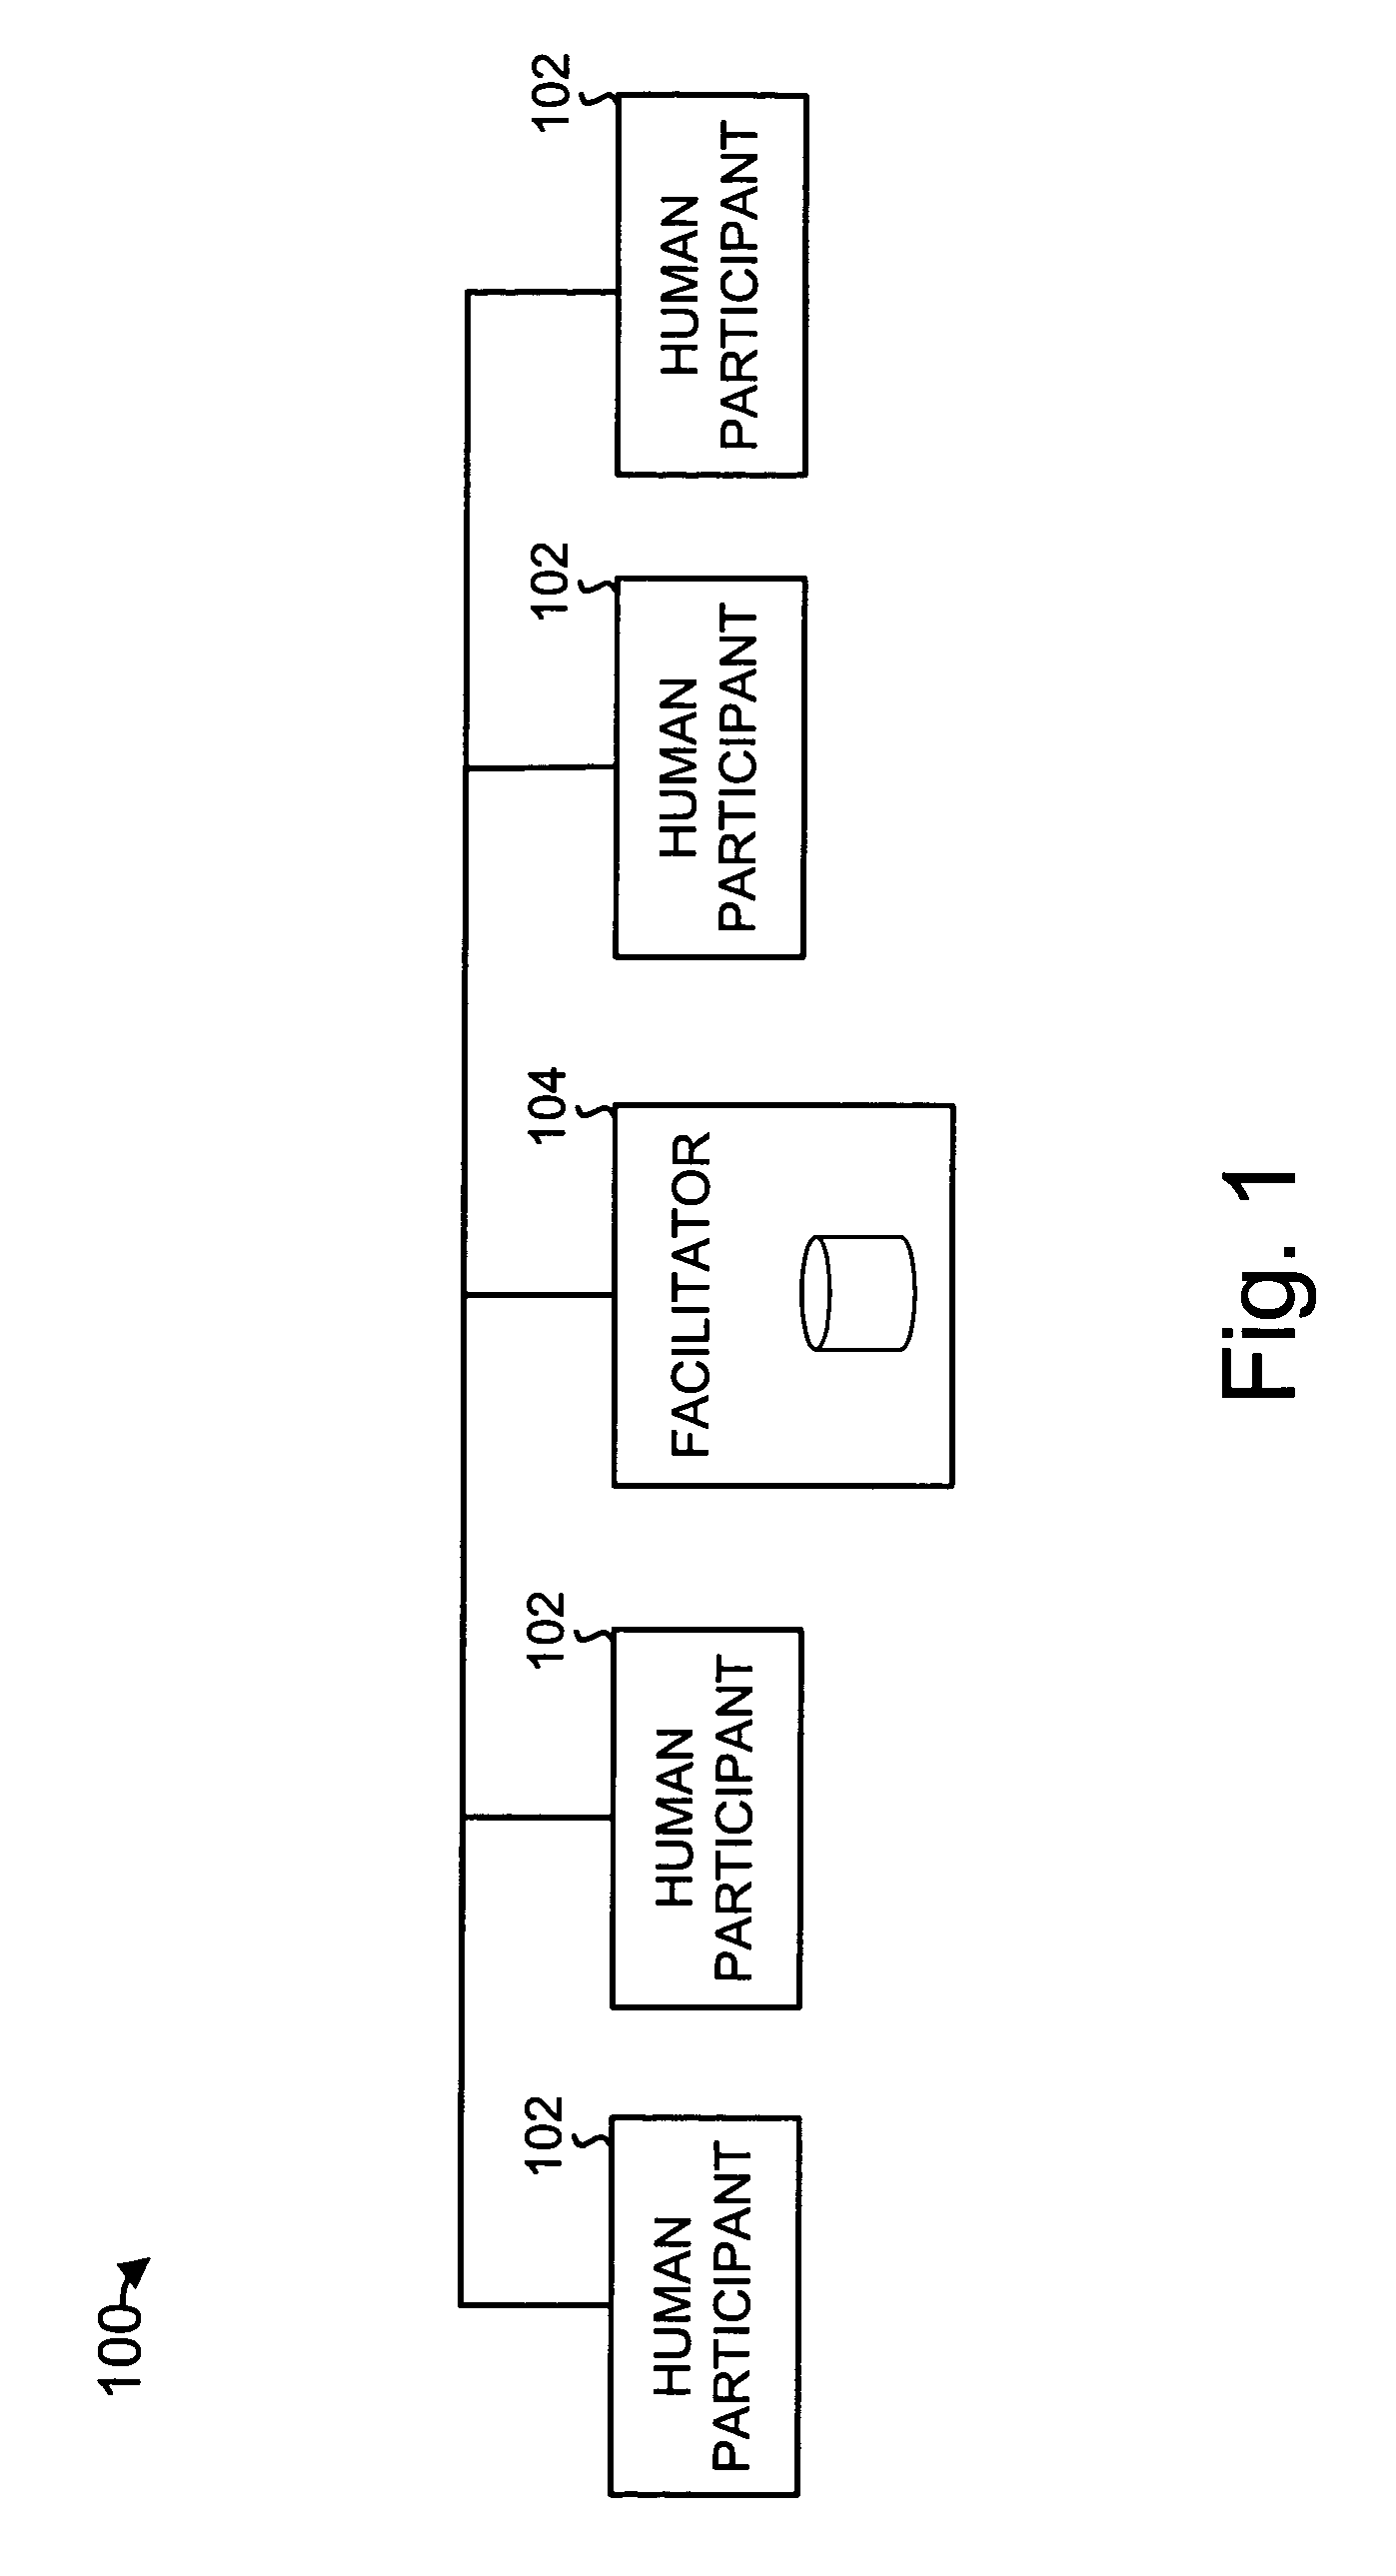 Speech recognition system for managing telemeetings